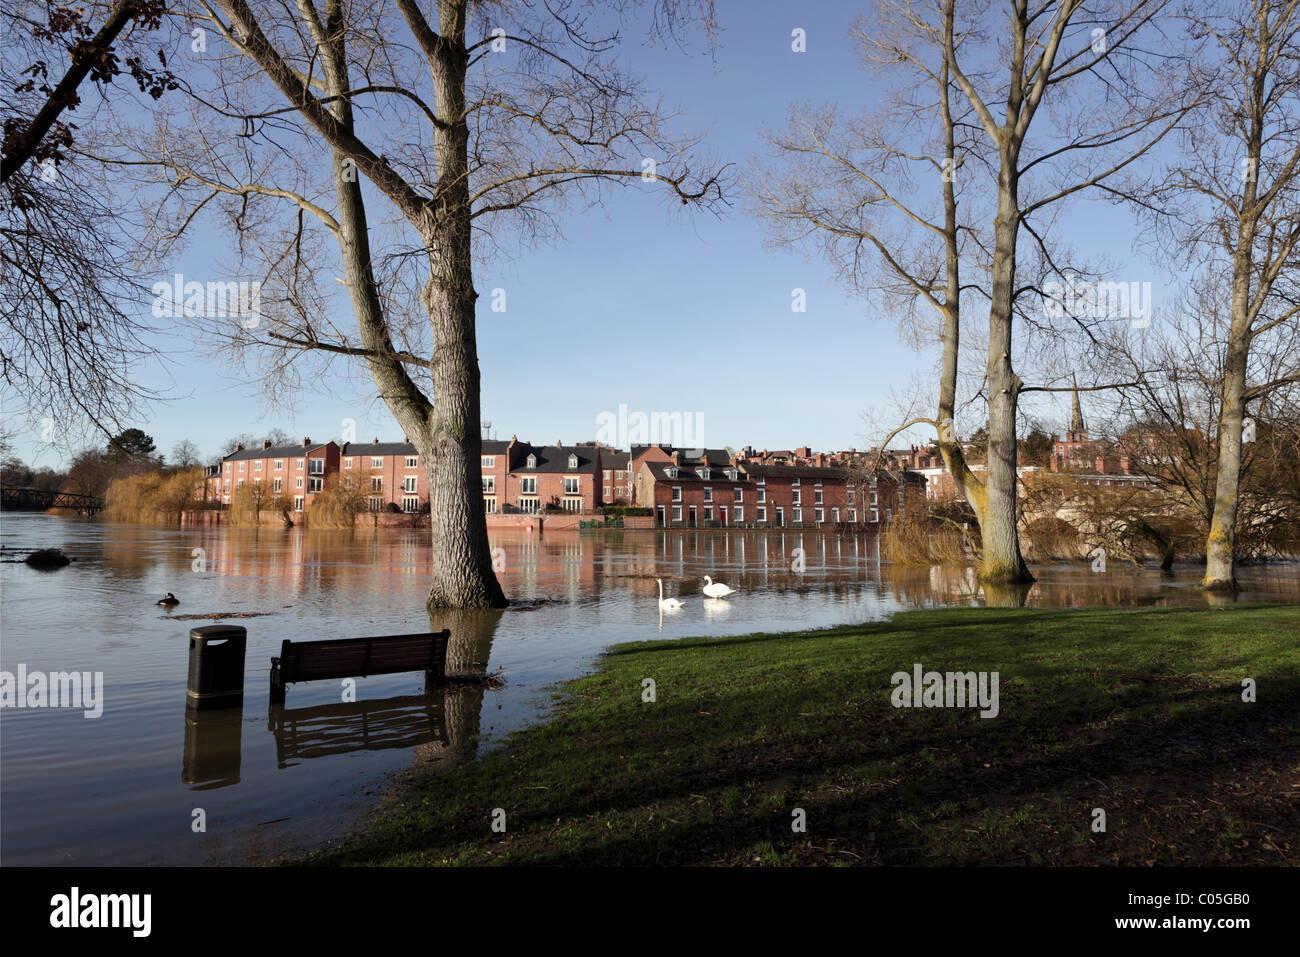 The River Severn in Shrewsbury during annual flooding during the winter months. Stock Photo